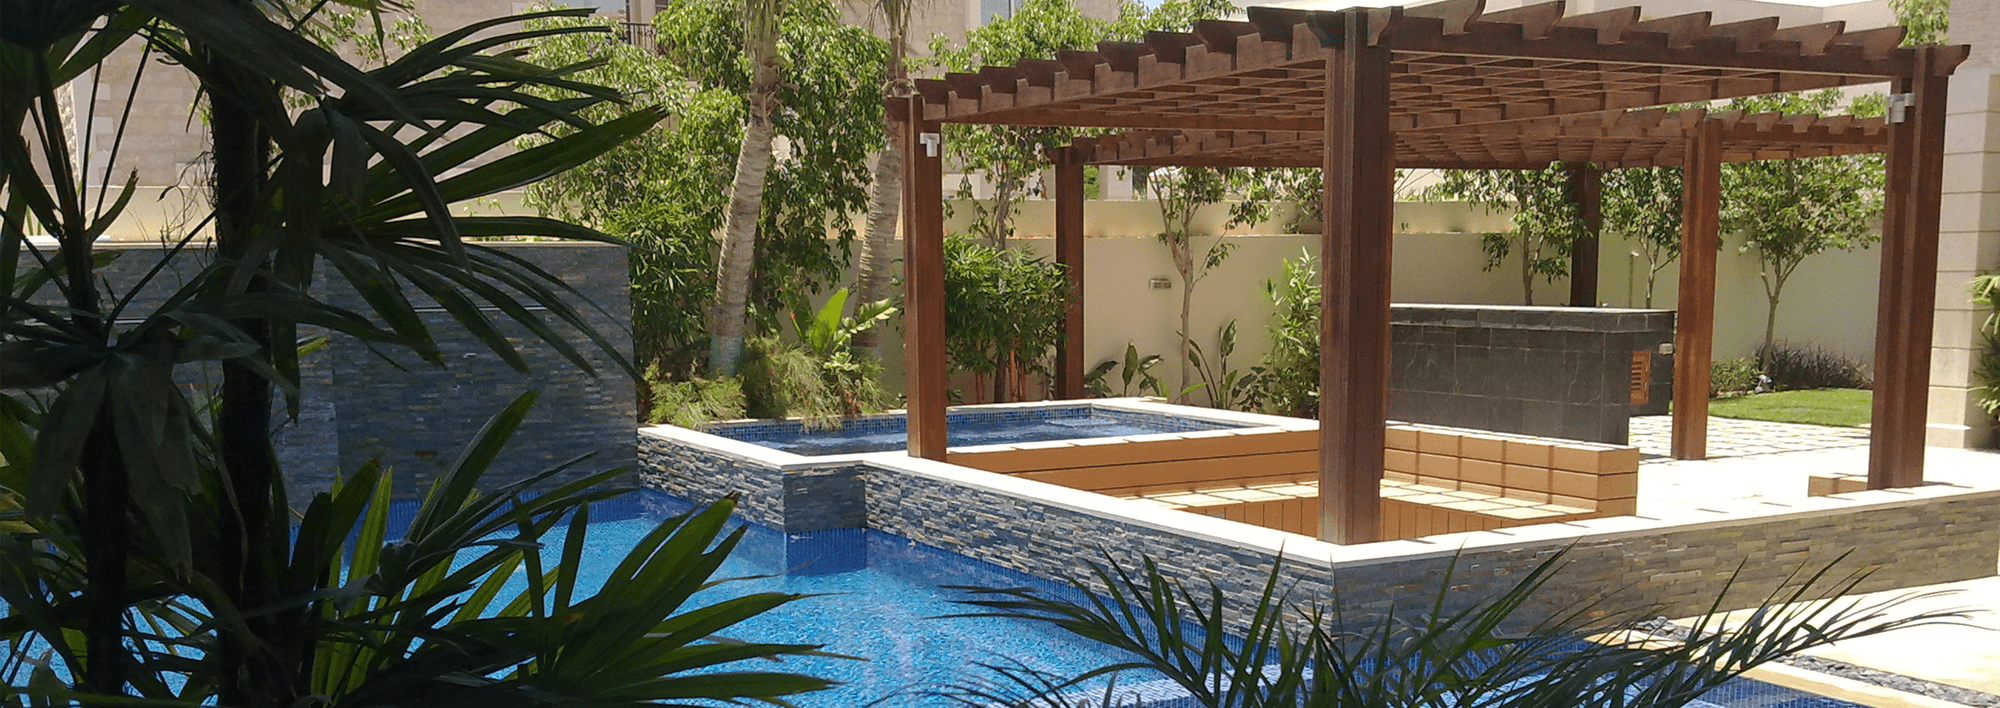 One of Asali's projects, showing an outdoor pool of a villa